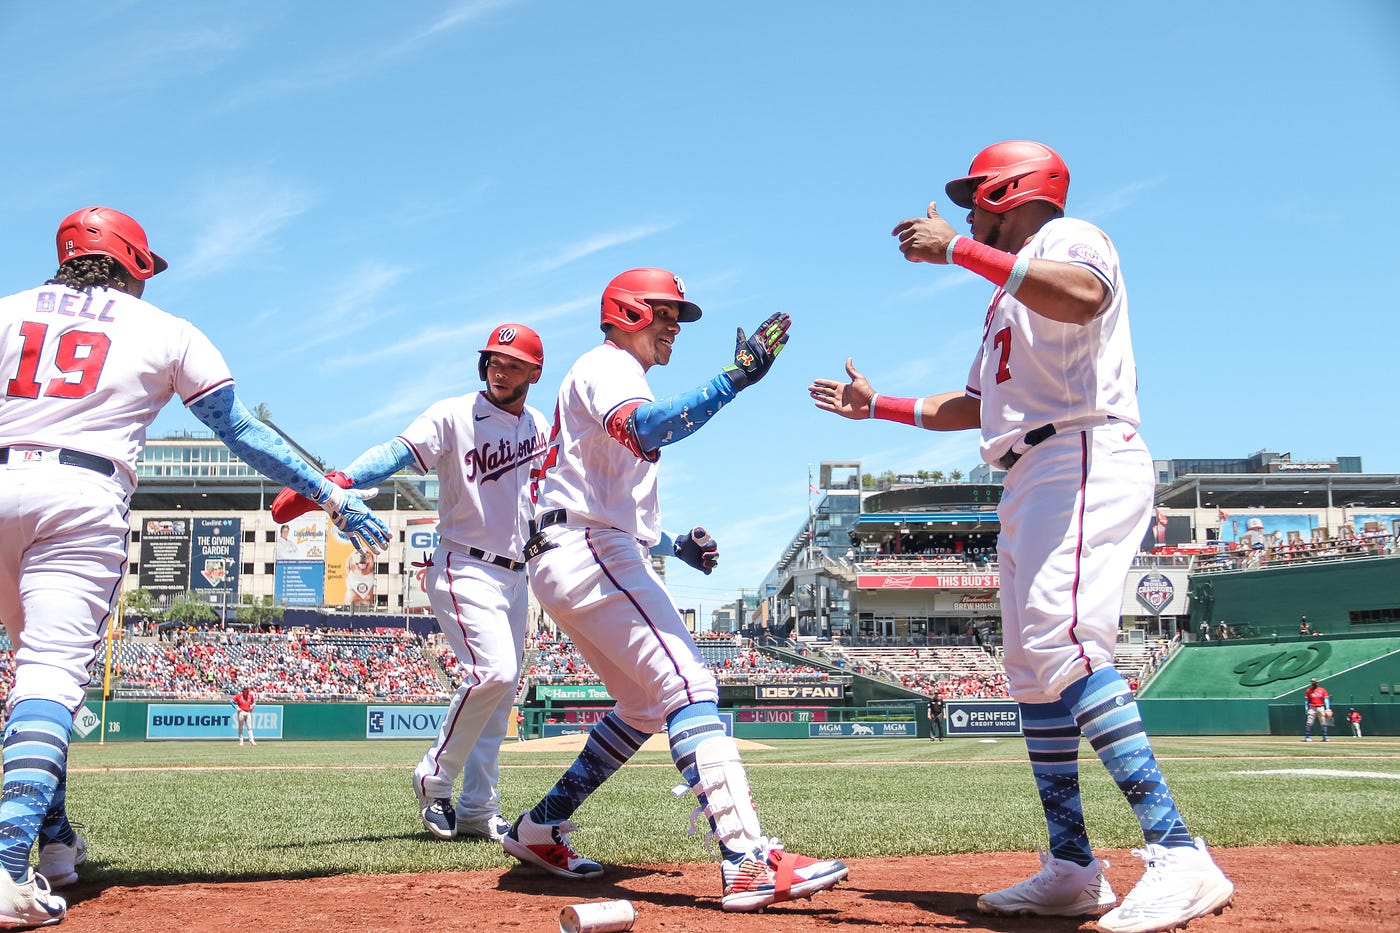 Nationals close out road trip with three-game series at Giants, by  Nationals Communications